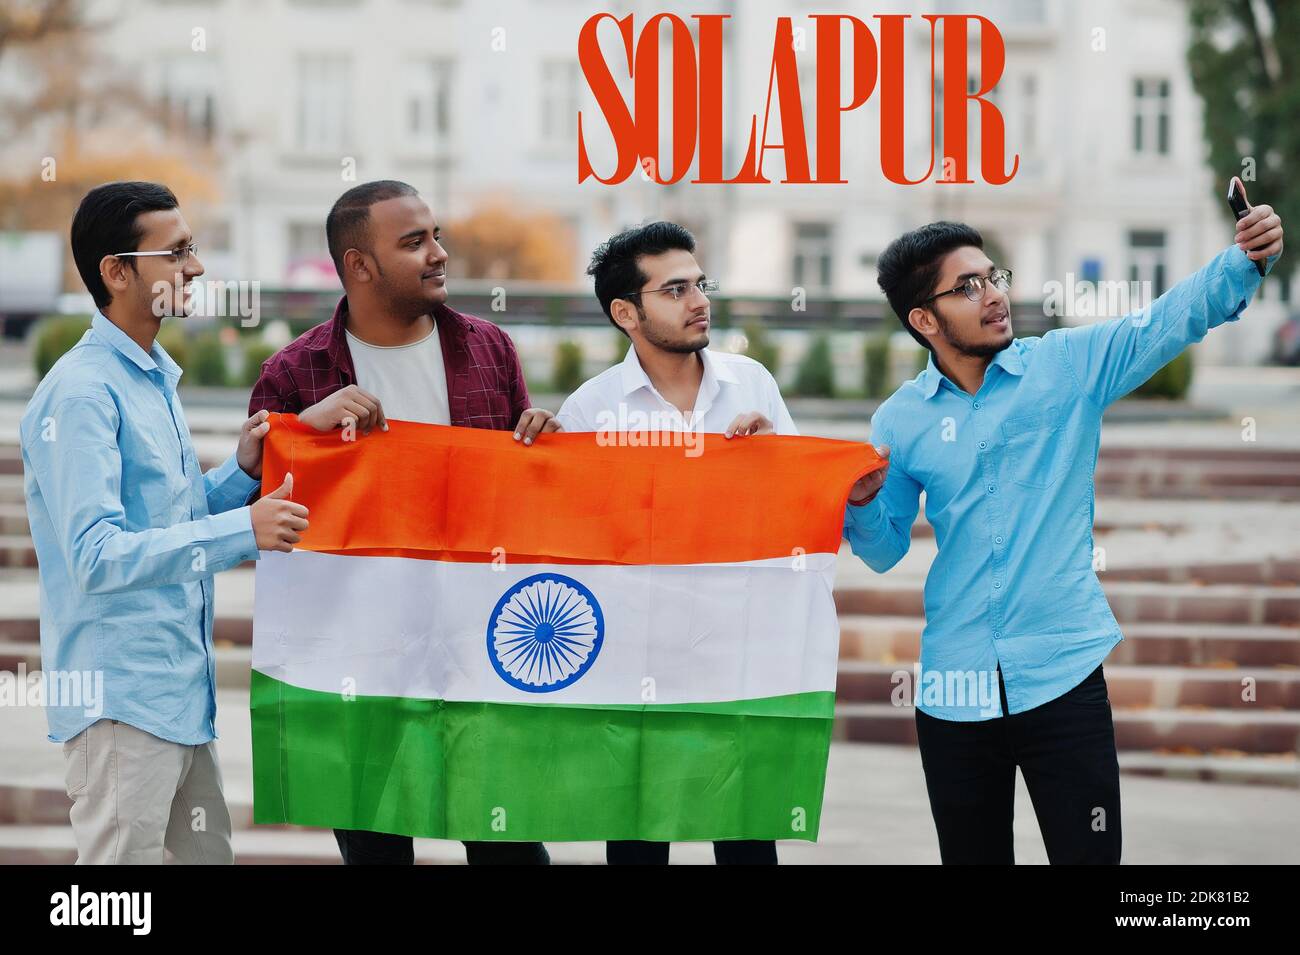 Solapur city inscription. Group of four indian male friends with India flag making selfie on mobile phone. Largest India cities concept. Stock Photo